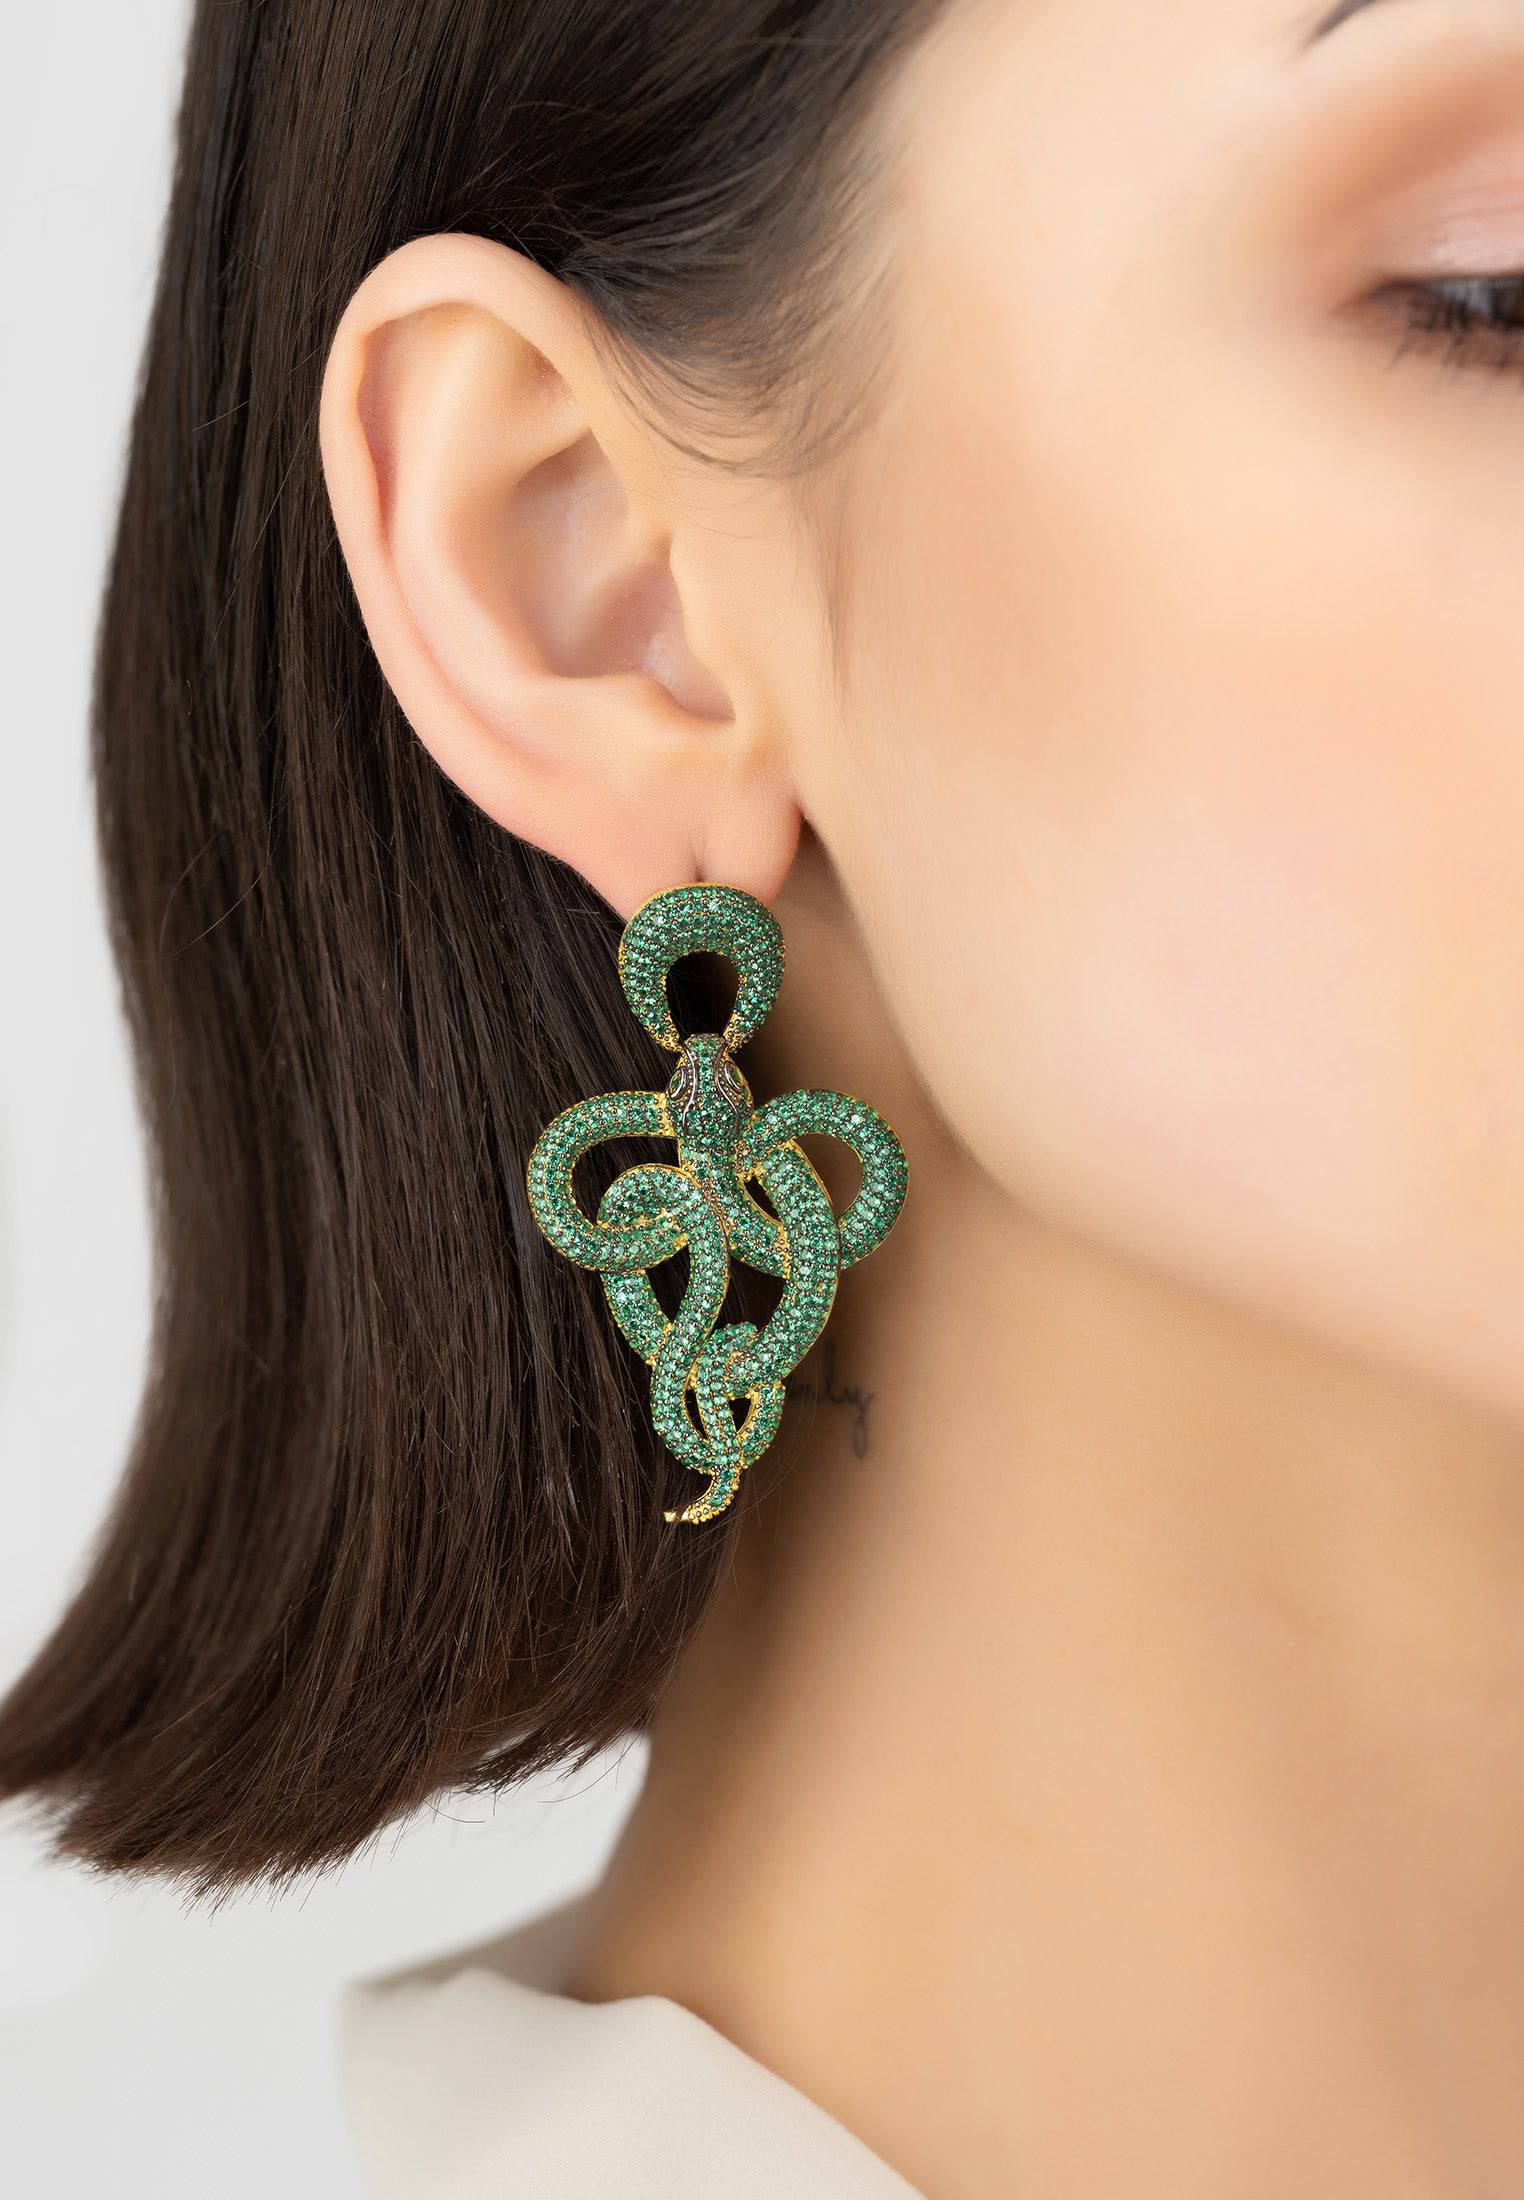 Gold Viper Snake Drop Earrings with Emerald CZ Stones - Animal Inspired Jewelry for Day and Night - Jewelry & Watches - Bijou Her -  -  - 